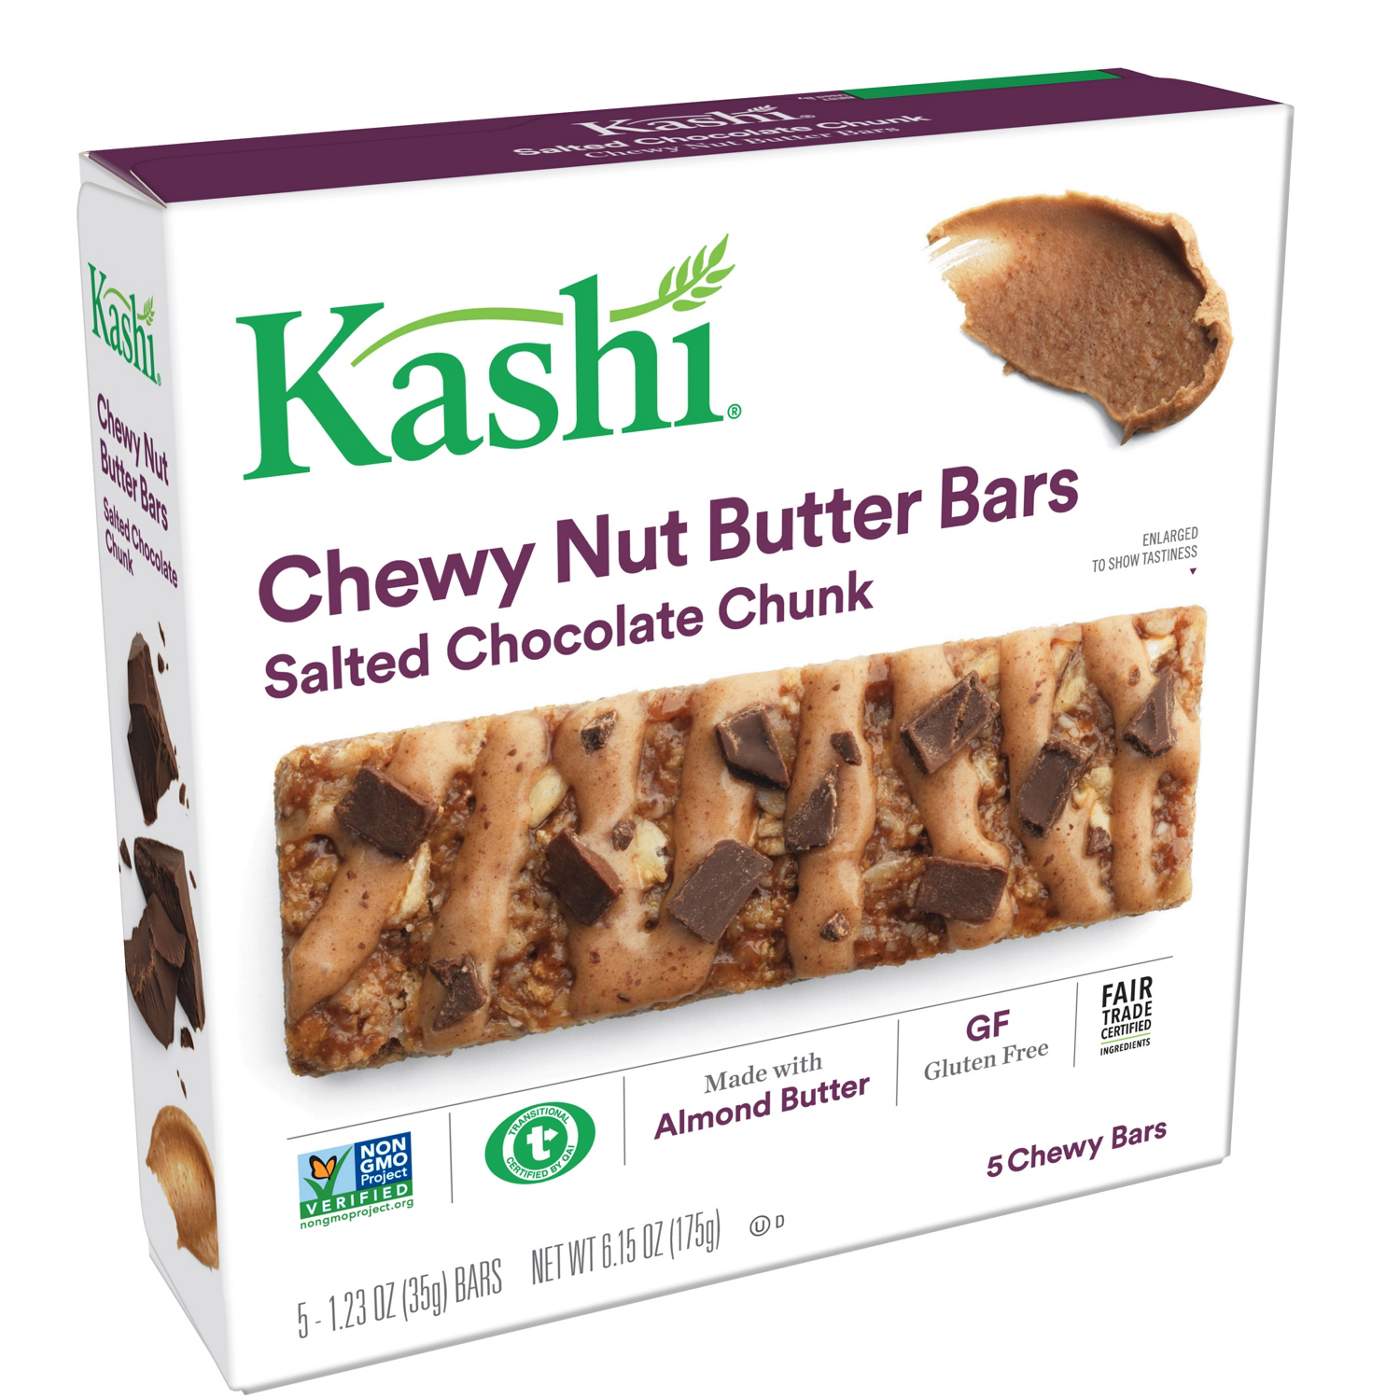 Kashi Salted Chocolate Chunk Chewy Nut Butter Bars; image 1 of 2